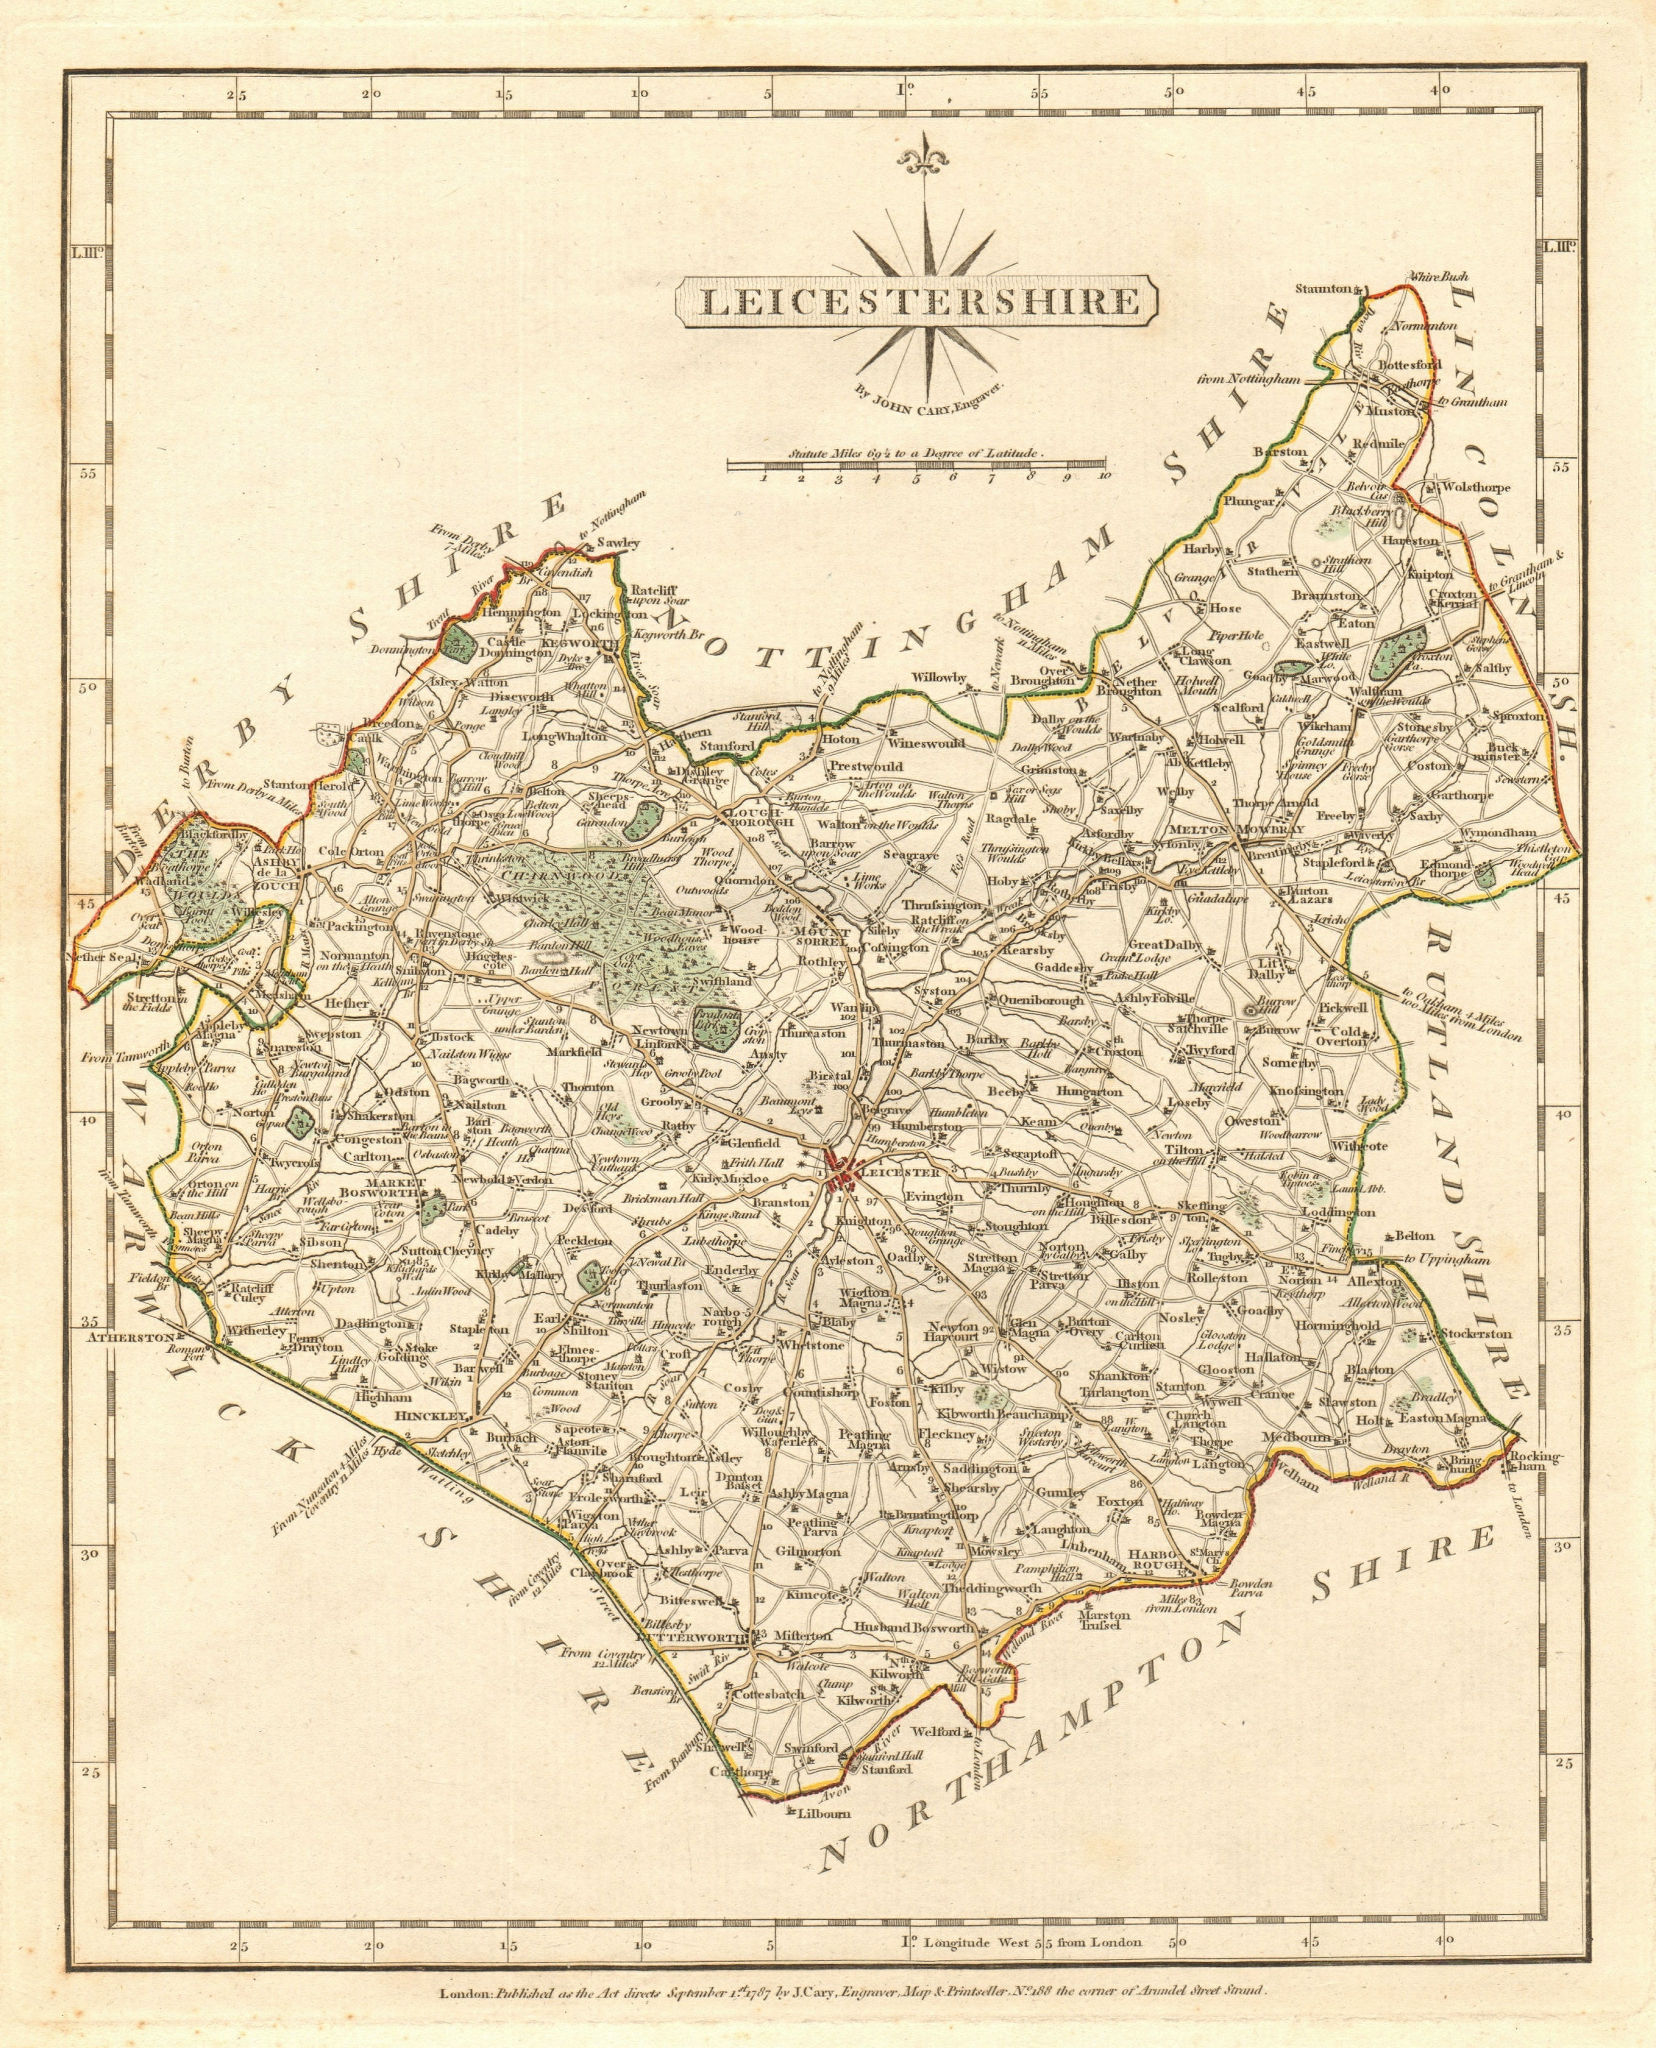 Associate Product Antique county map of LEICESTERSHIRE by JOHN CARY. Original outline colour 1787